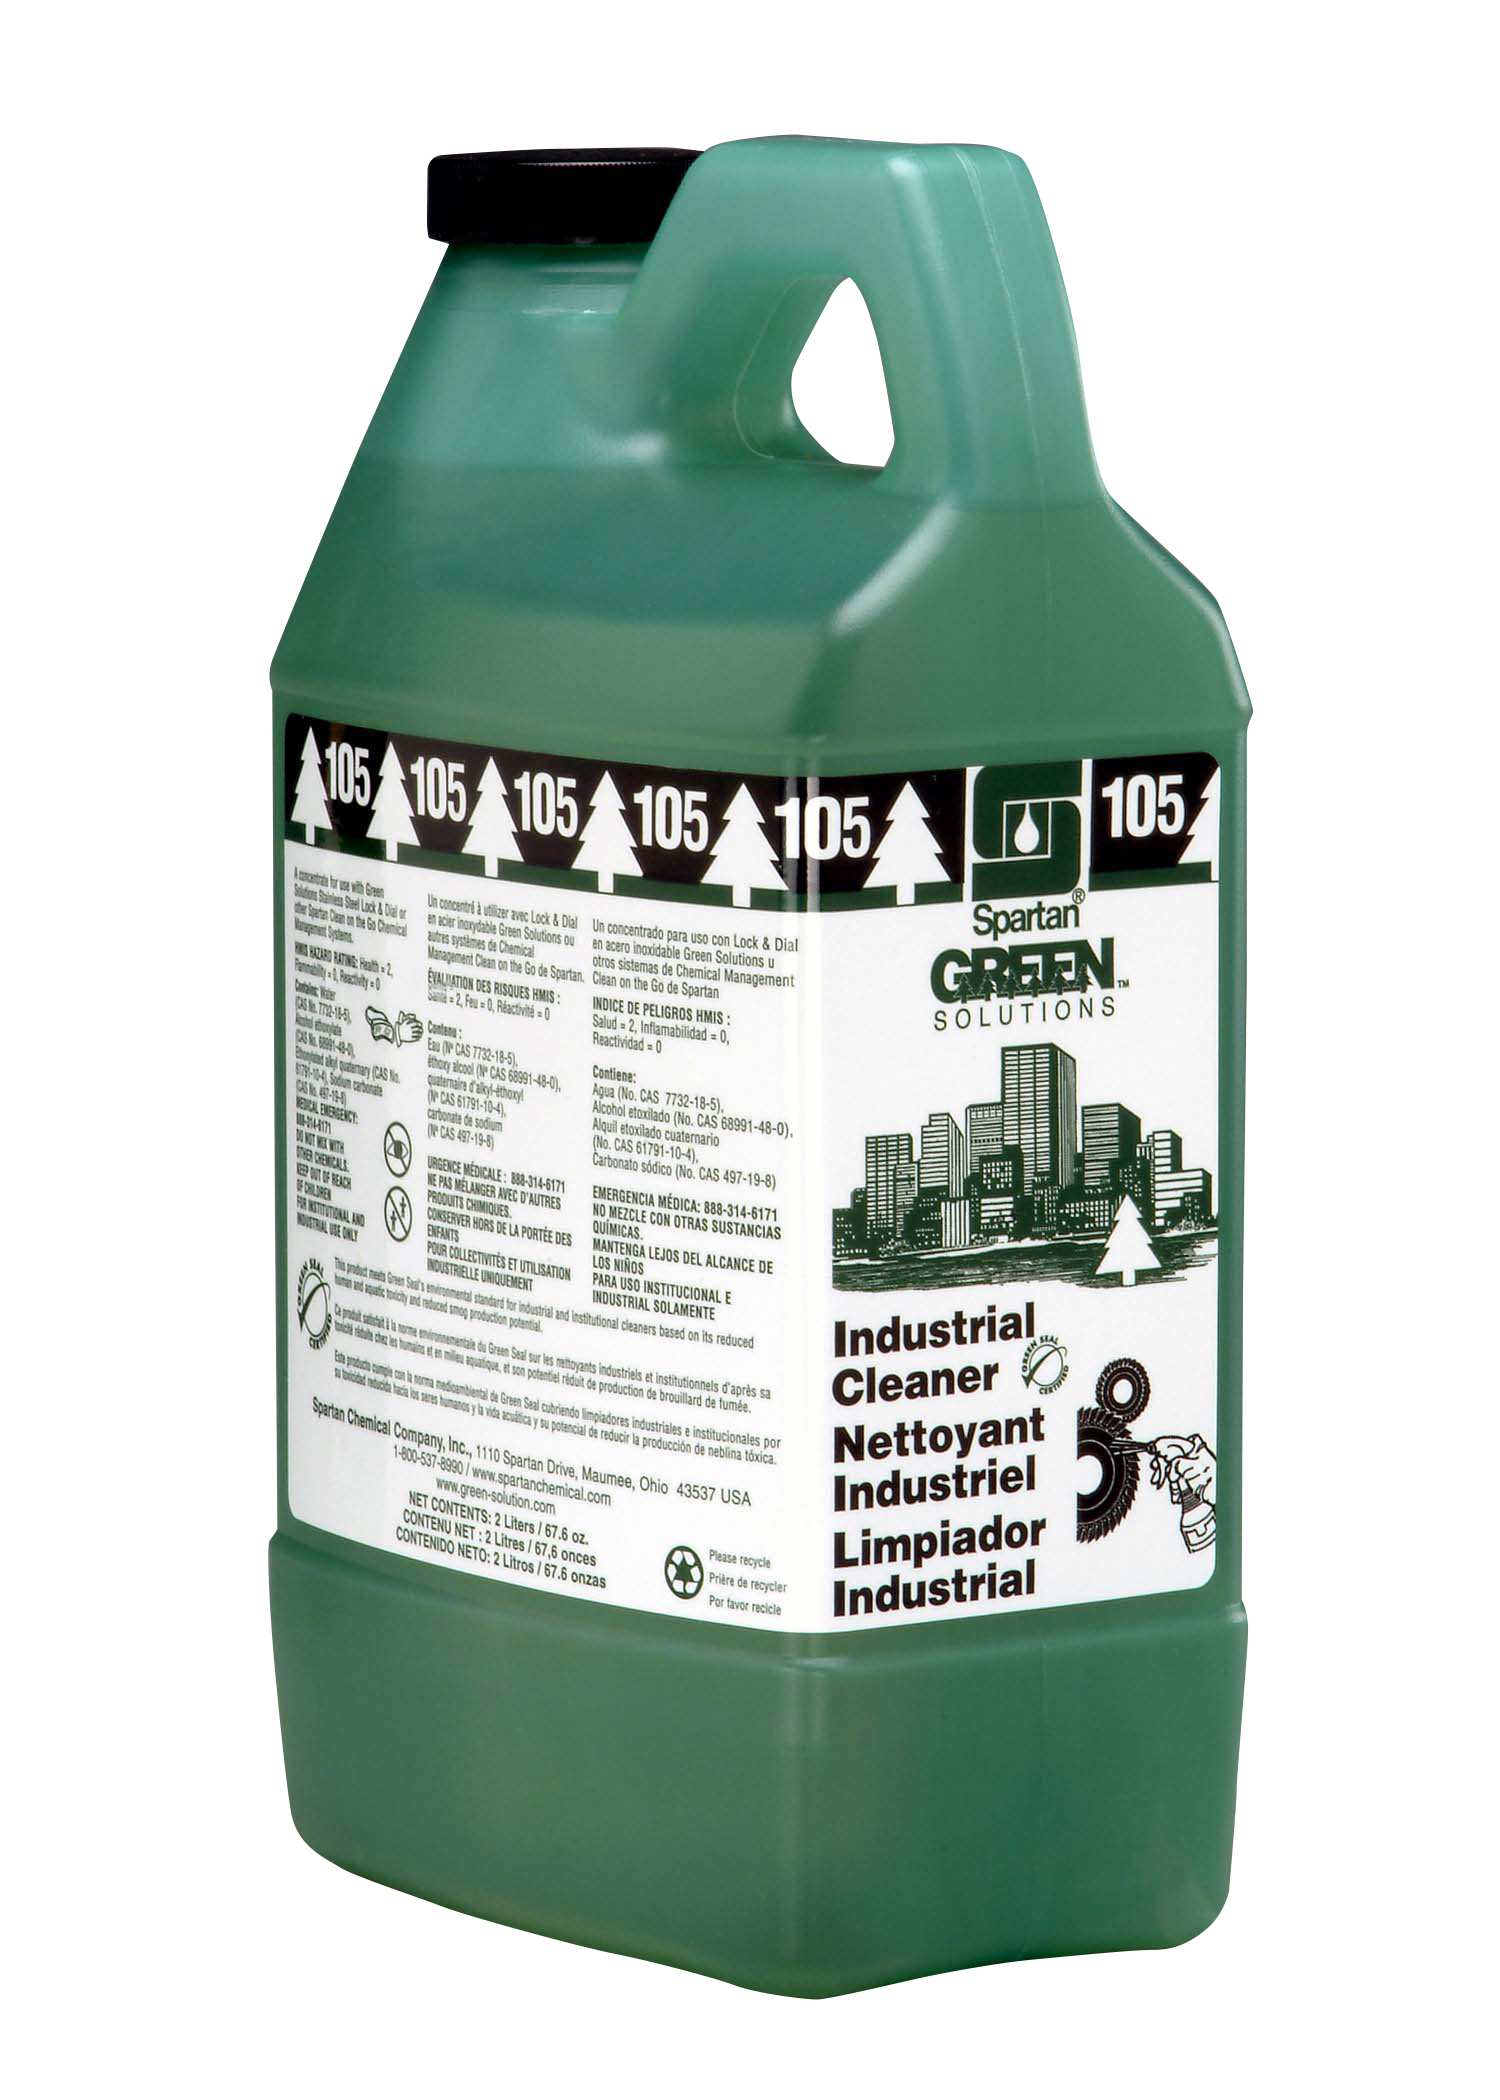 Green Solutions® Industrial Cleaner 105 2 liter (4 per case)